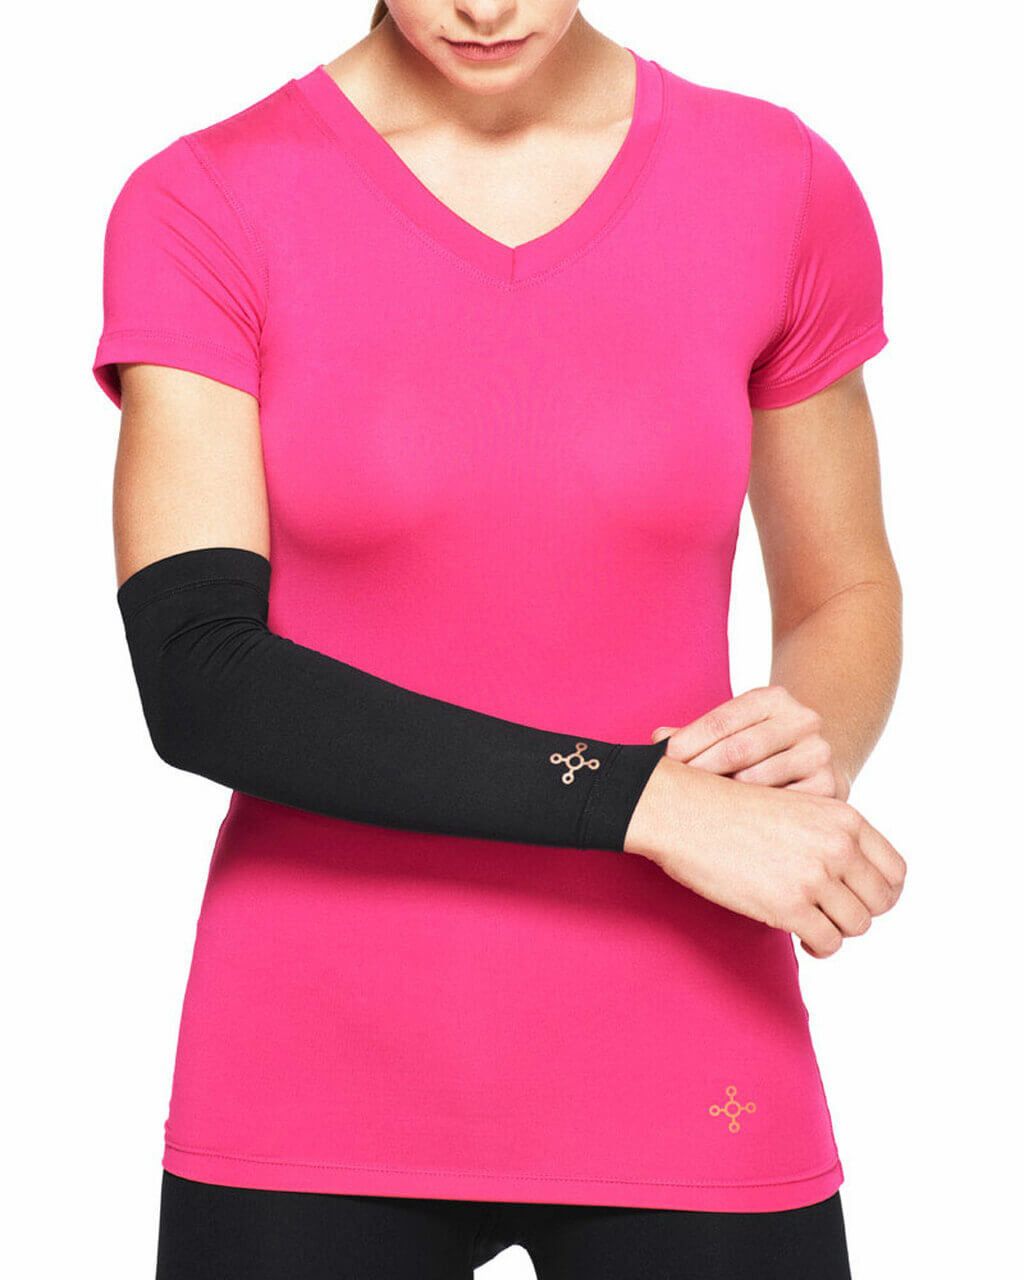 Image of Tommie Copper Compression Arm Sleeve